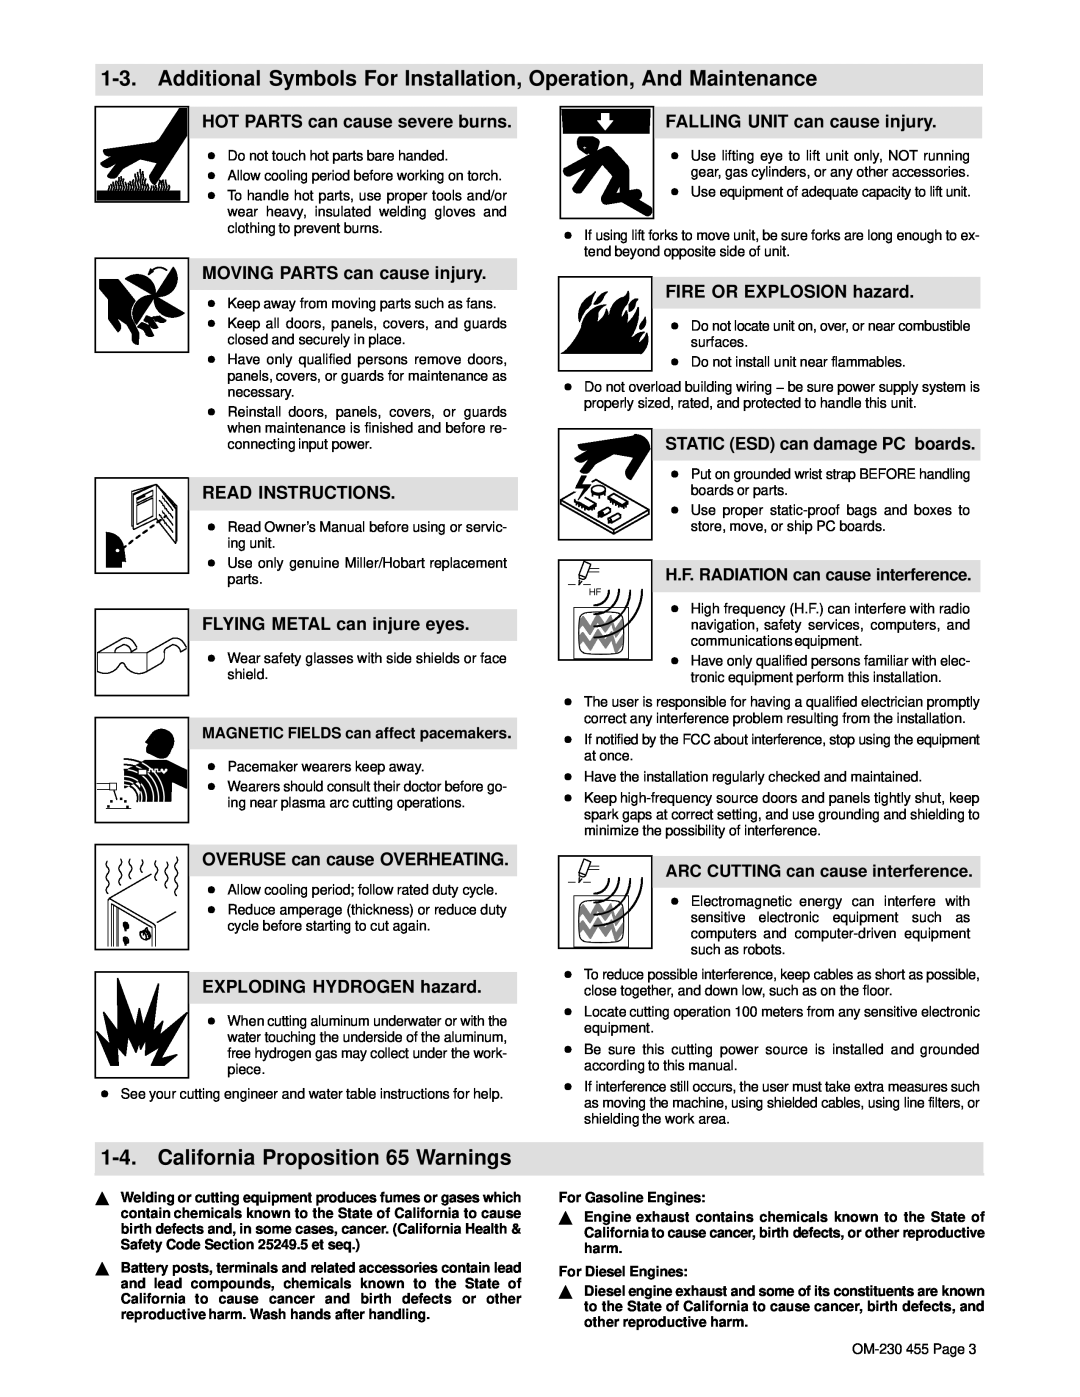 Hobart Welding Products OM-230 455D Additional Symbols For Installation, Operation, And Maintenance, Read Instructions 